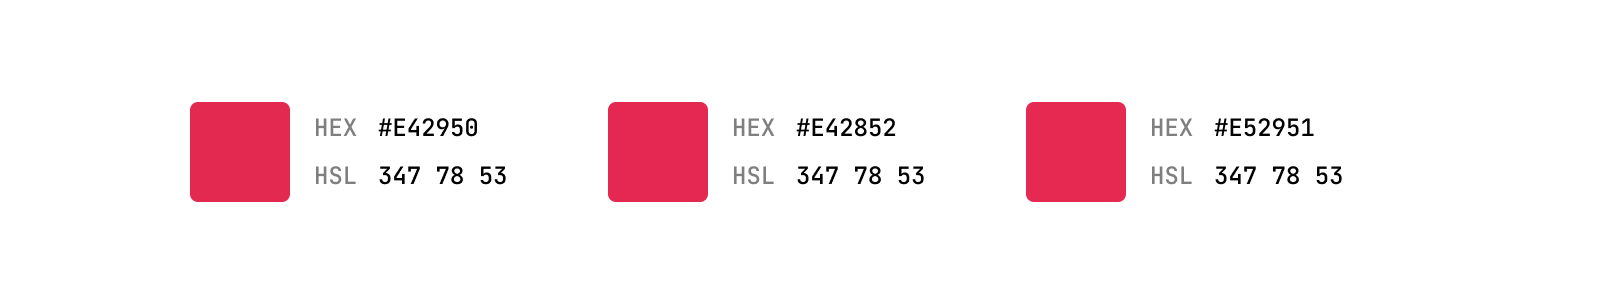 comparing HEX with HSL